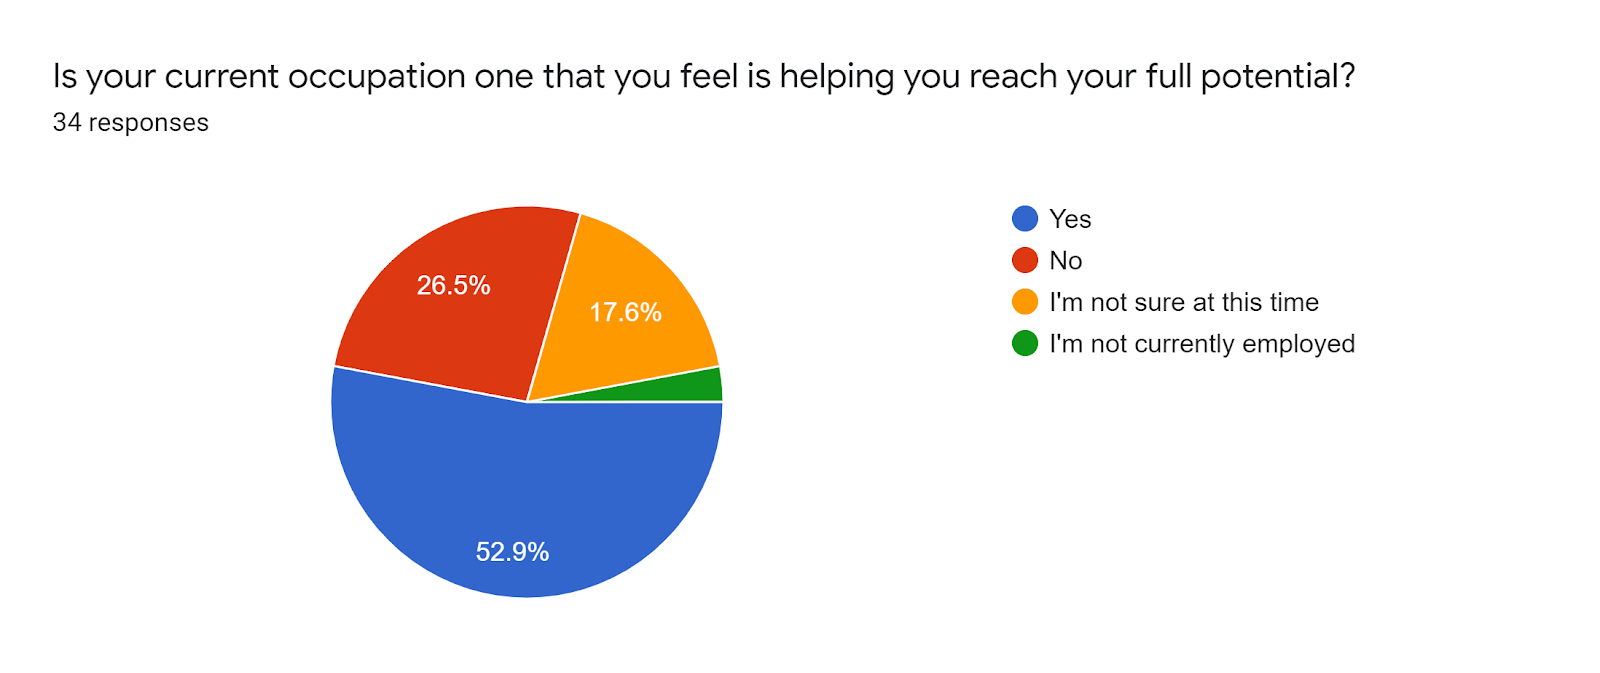 Forms response chart. Question title: Is your current occupation one that you feel is helping you reach your full potential?. Number of responses: 34 responses.